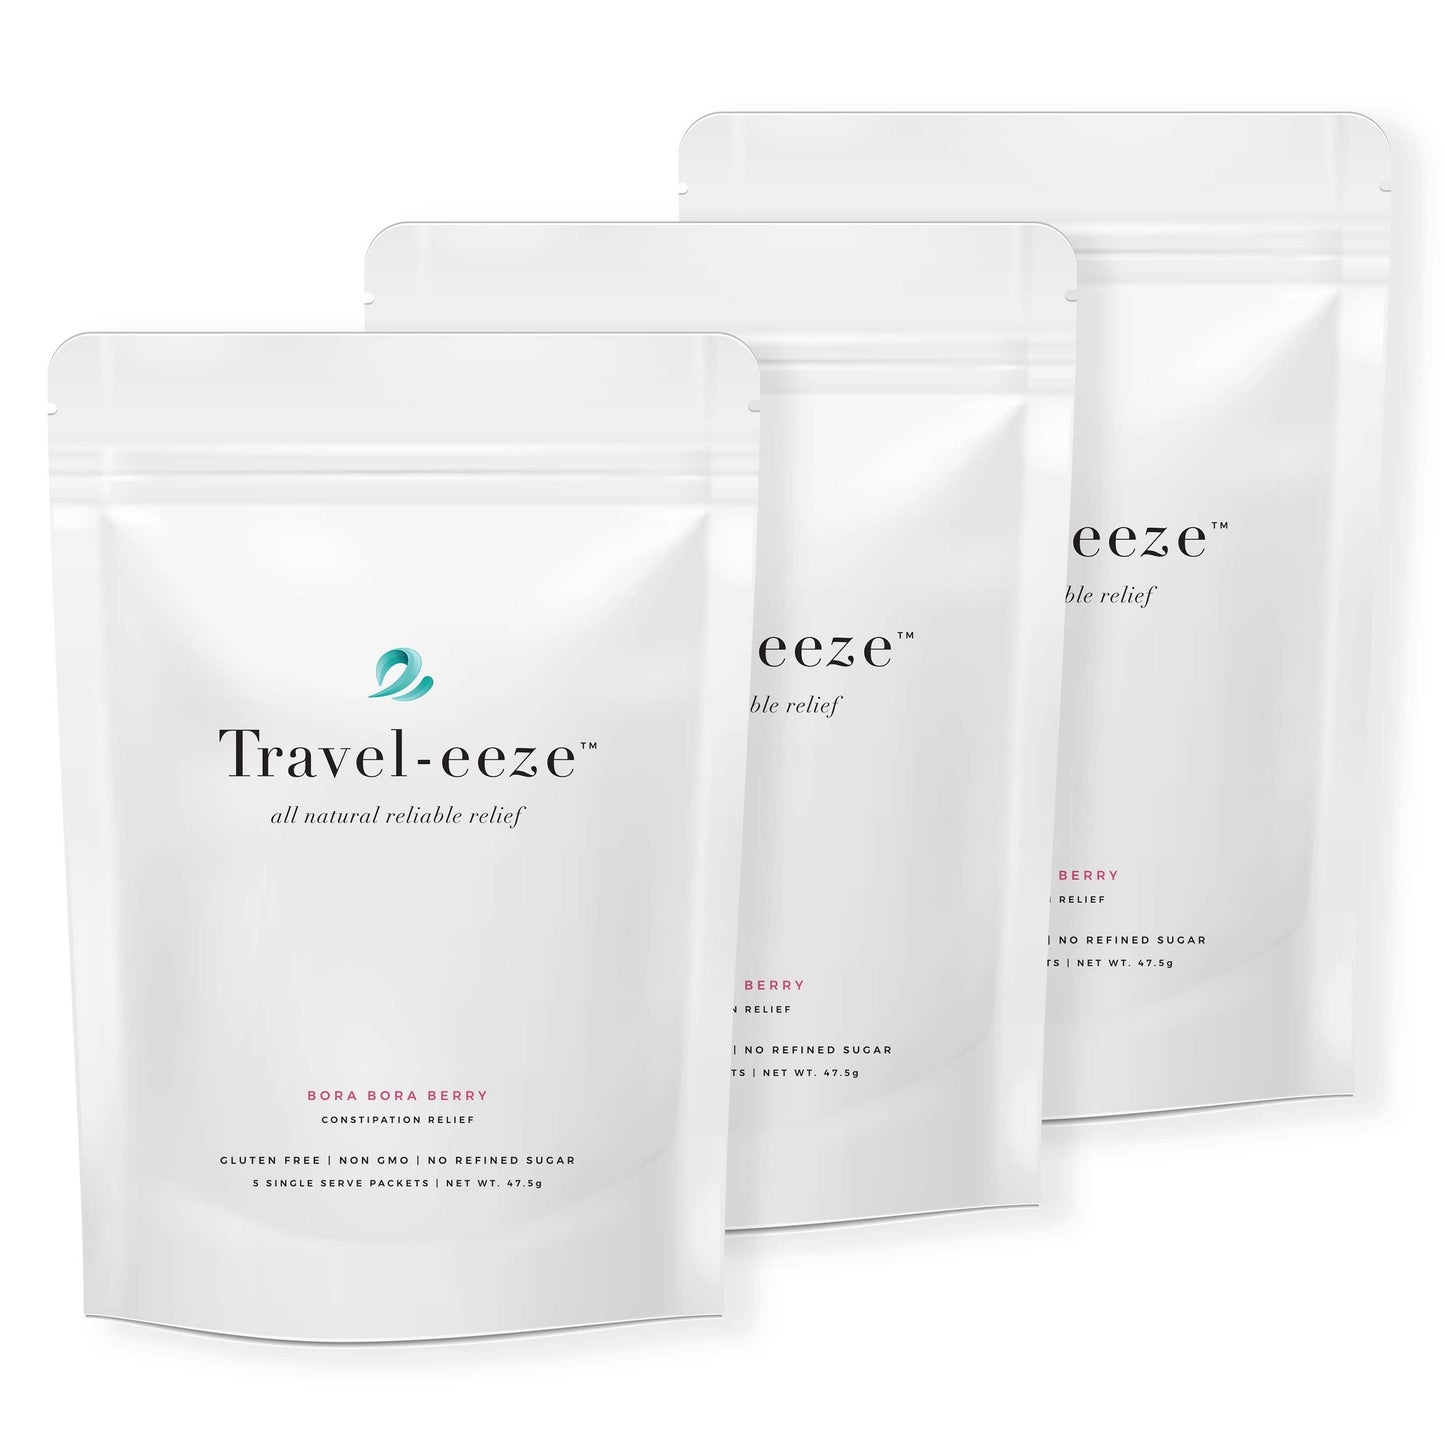 Ease Constipation Naturally with Travel-eeze